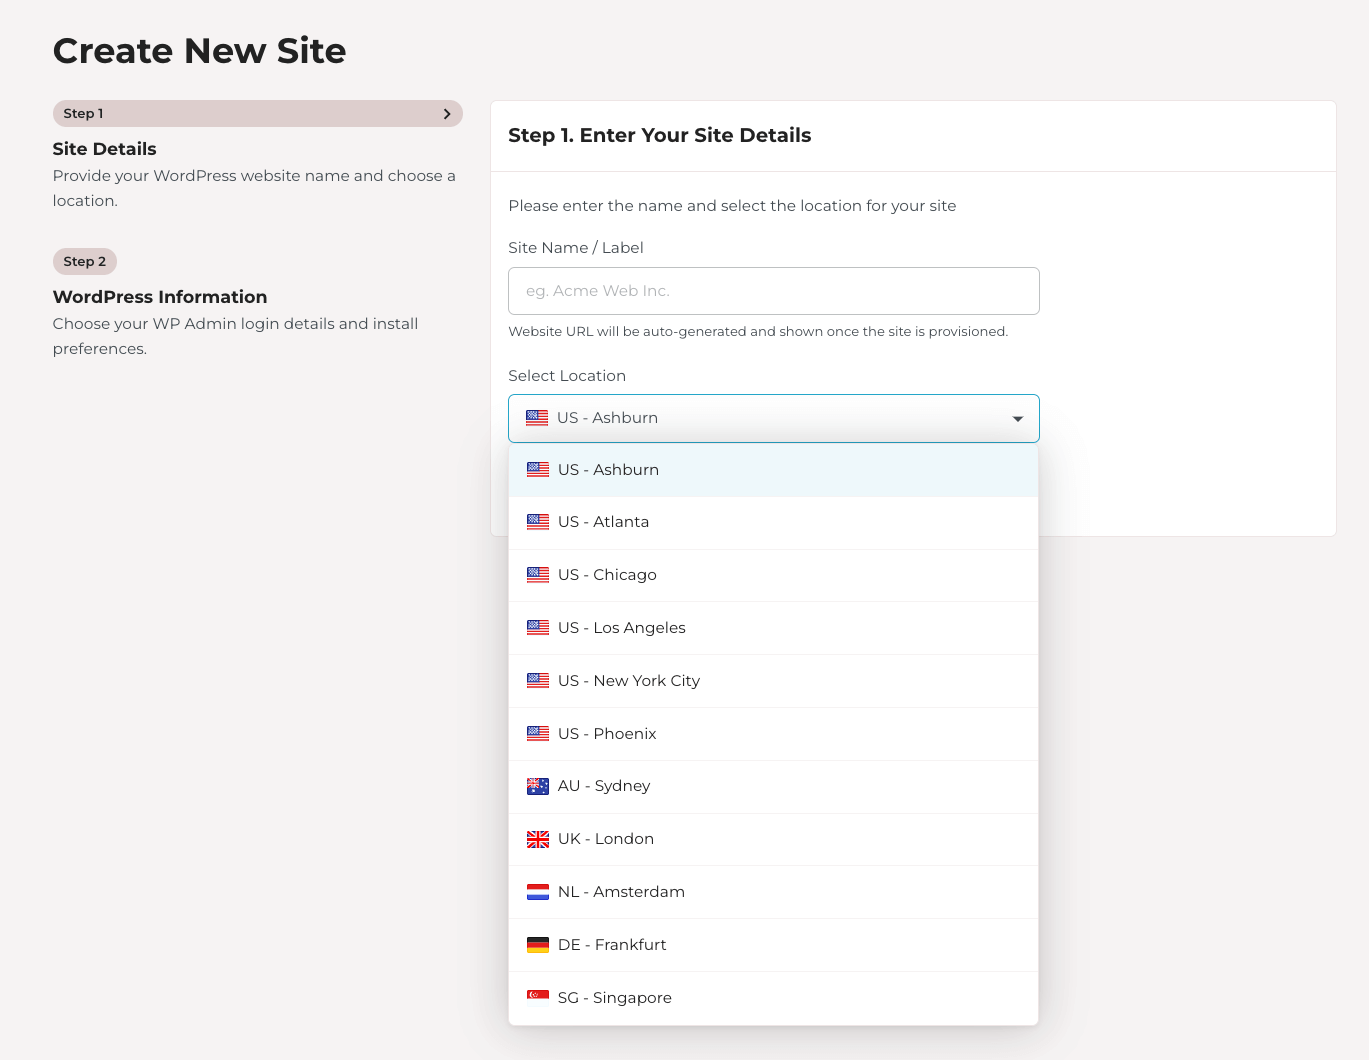 Rocket.net review: creating new site